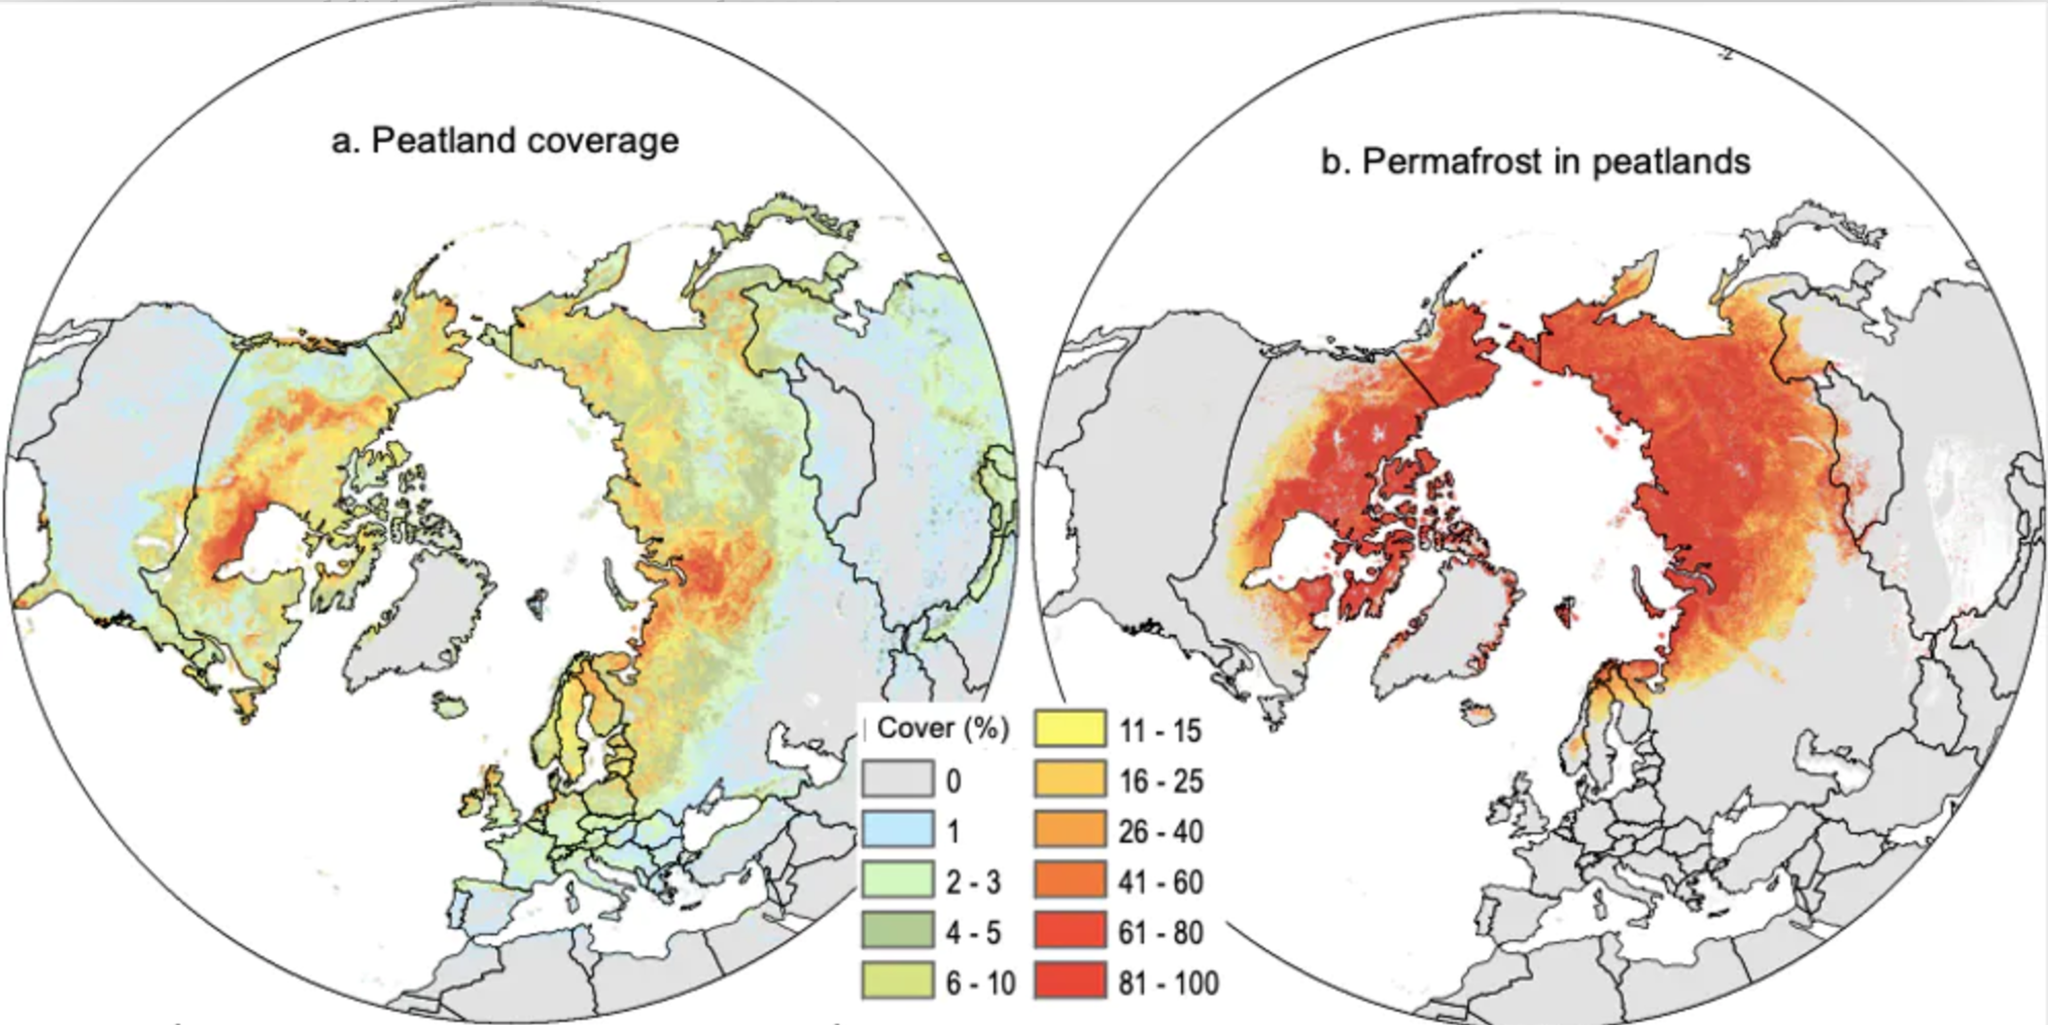 Peatland covers much of the far north – and often overlaps with permafrost